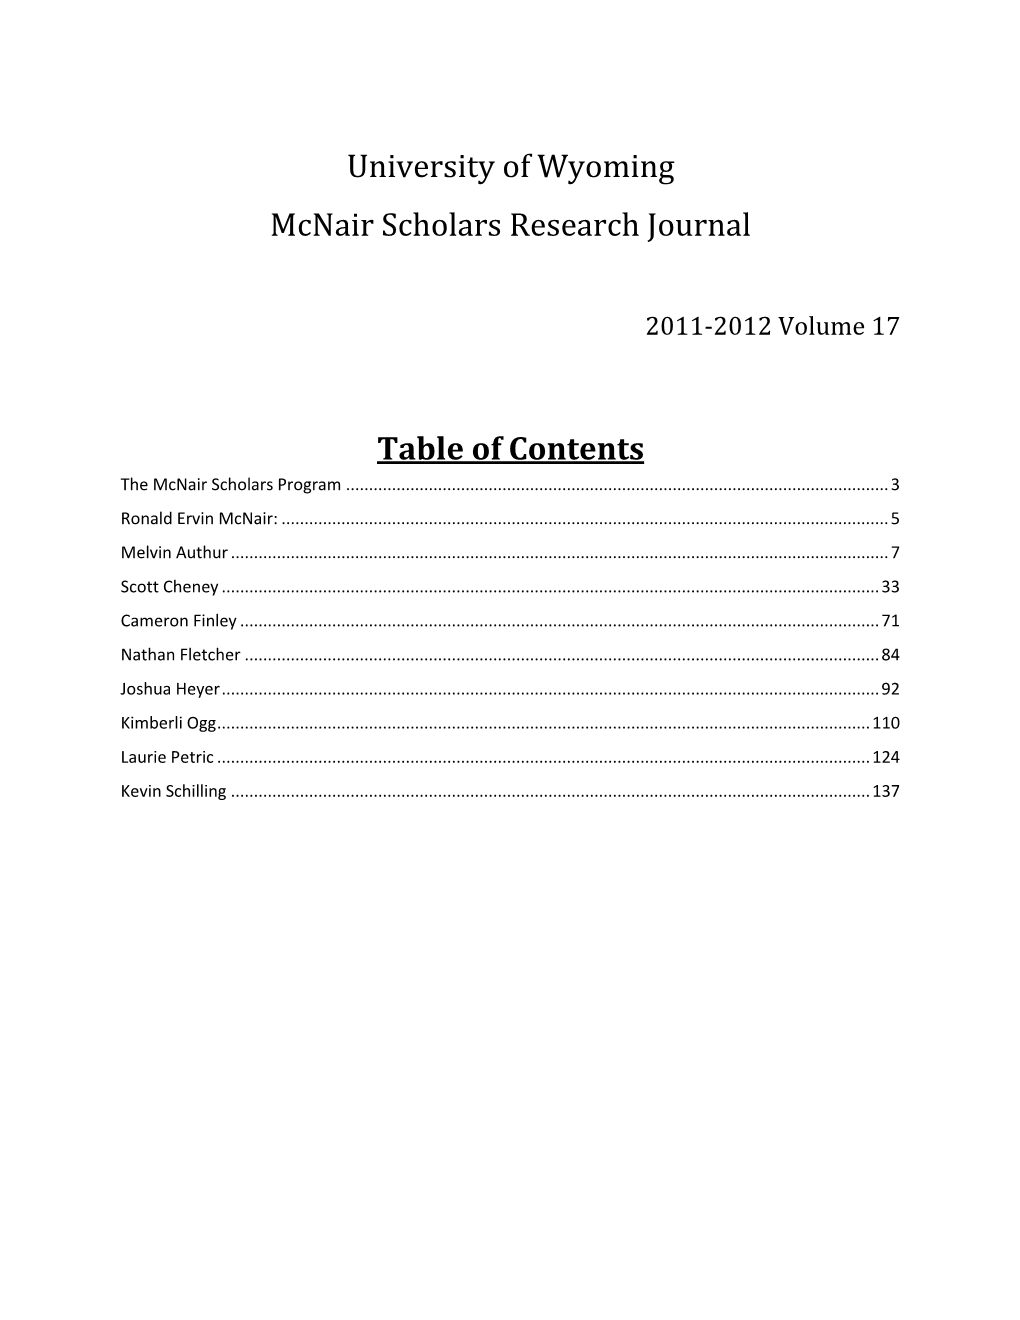 University of Wyoming Mcnair Scholars Research Journal Table Of